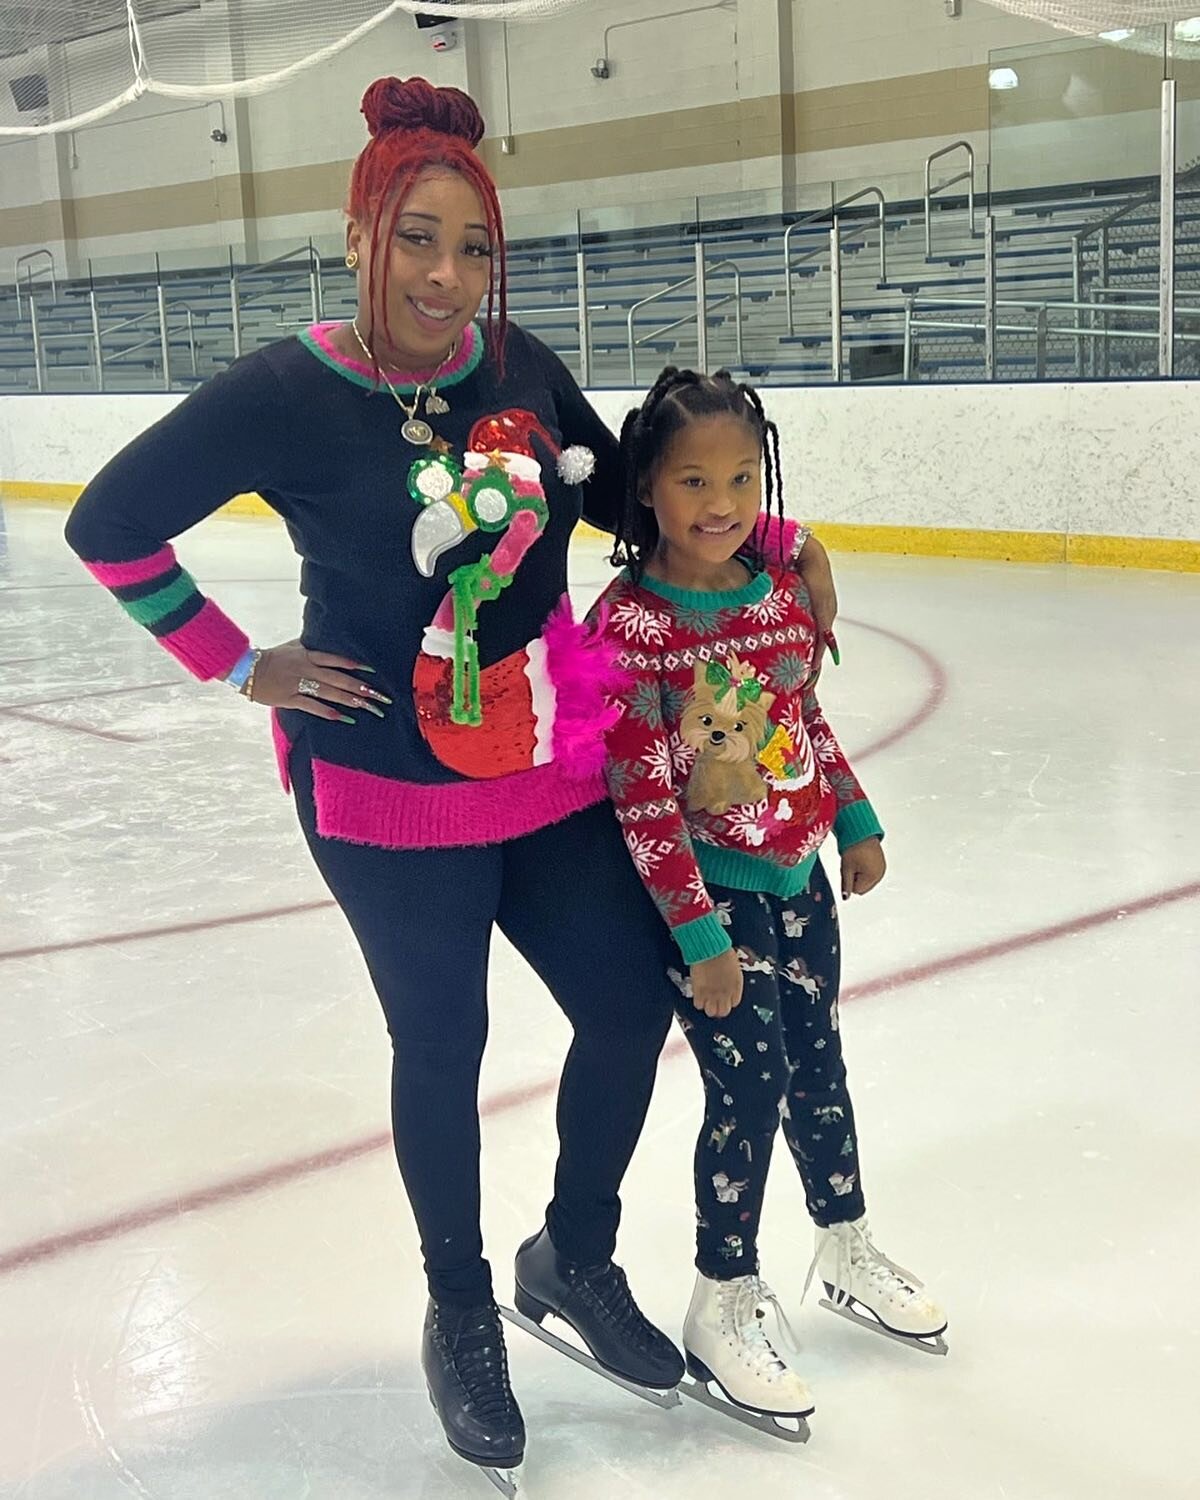 It&rsquo;s beginning to look a lot like Christmas! Coach Whitney and one of our Skaters were in the holiday spirit over the weekend🎄